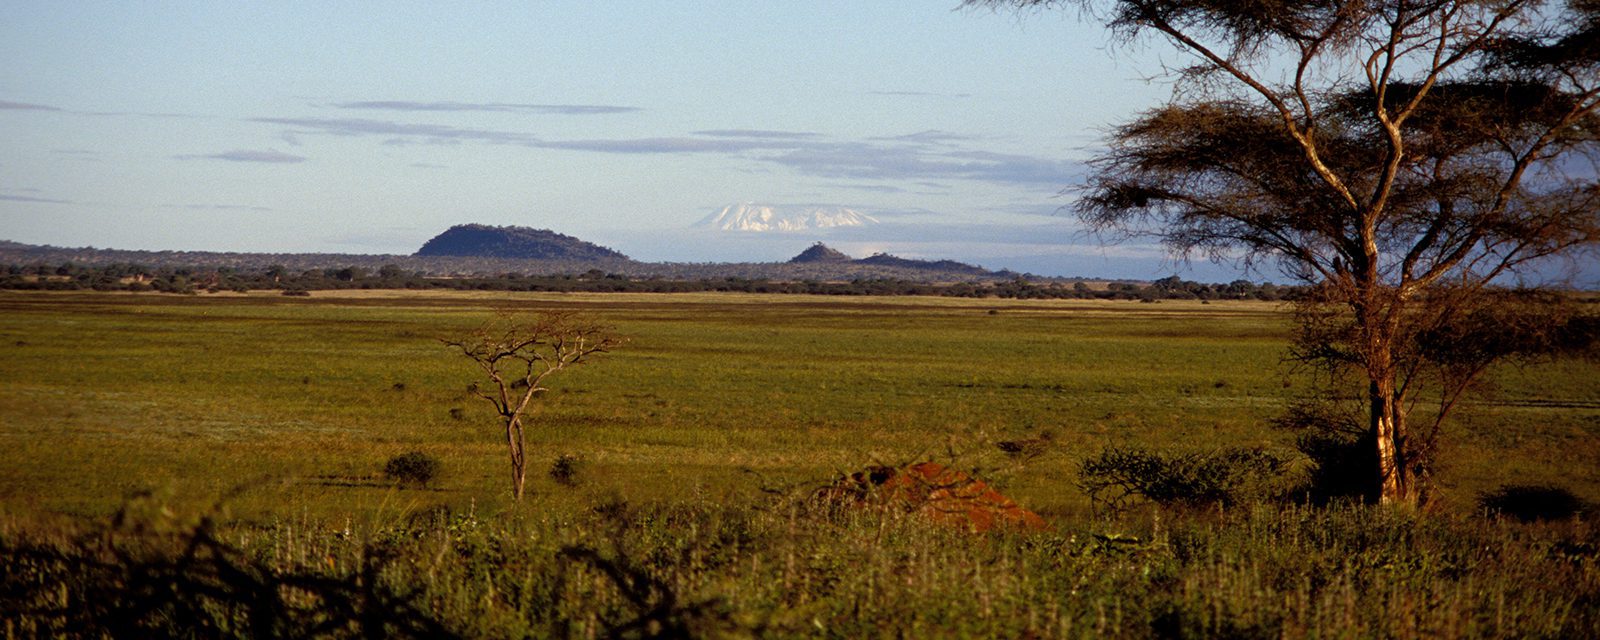 African landscape with Mount Kilimanjaro in the background.